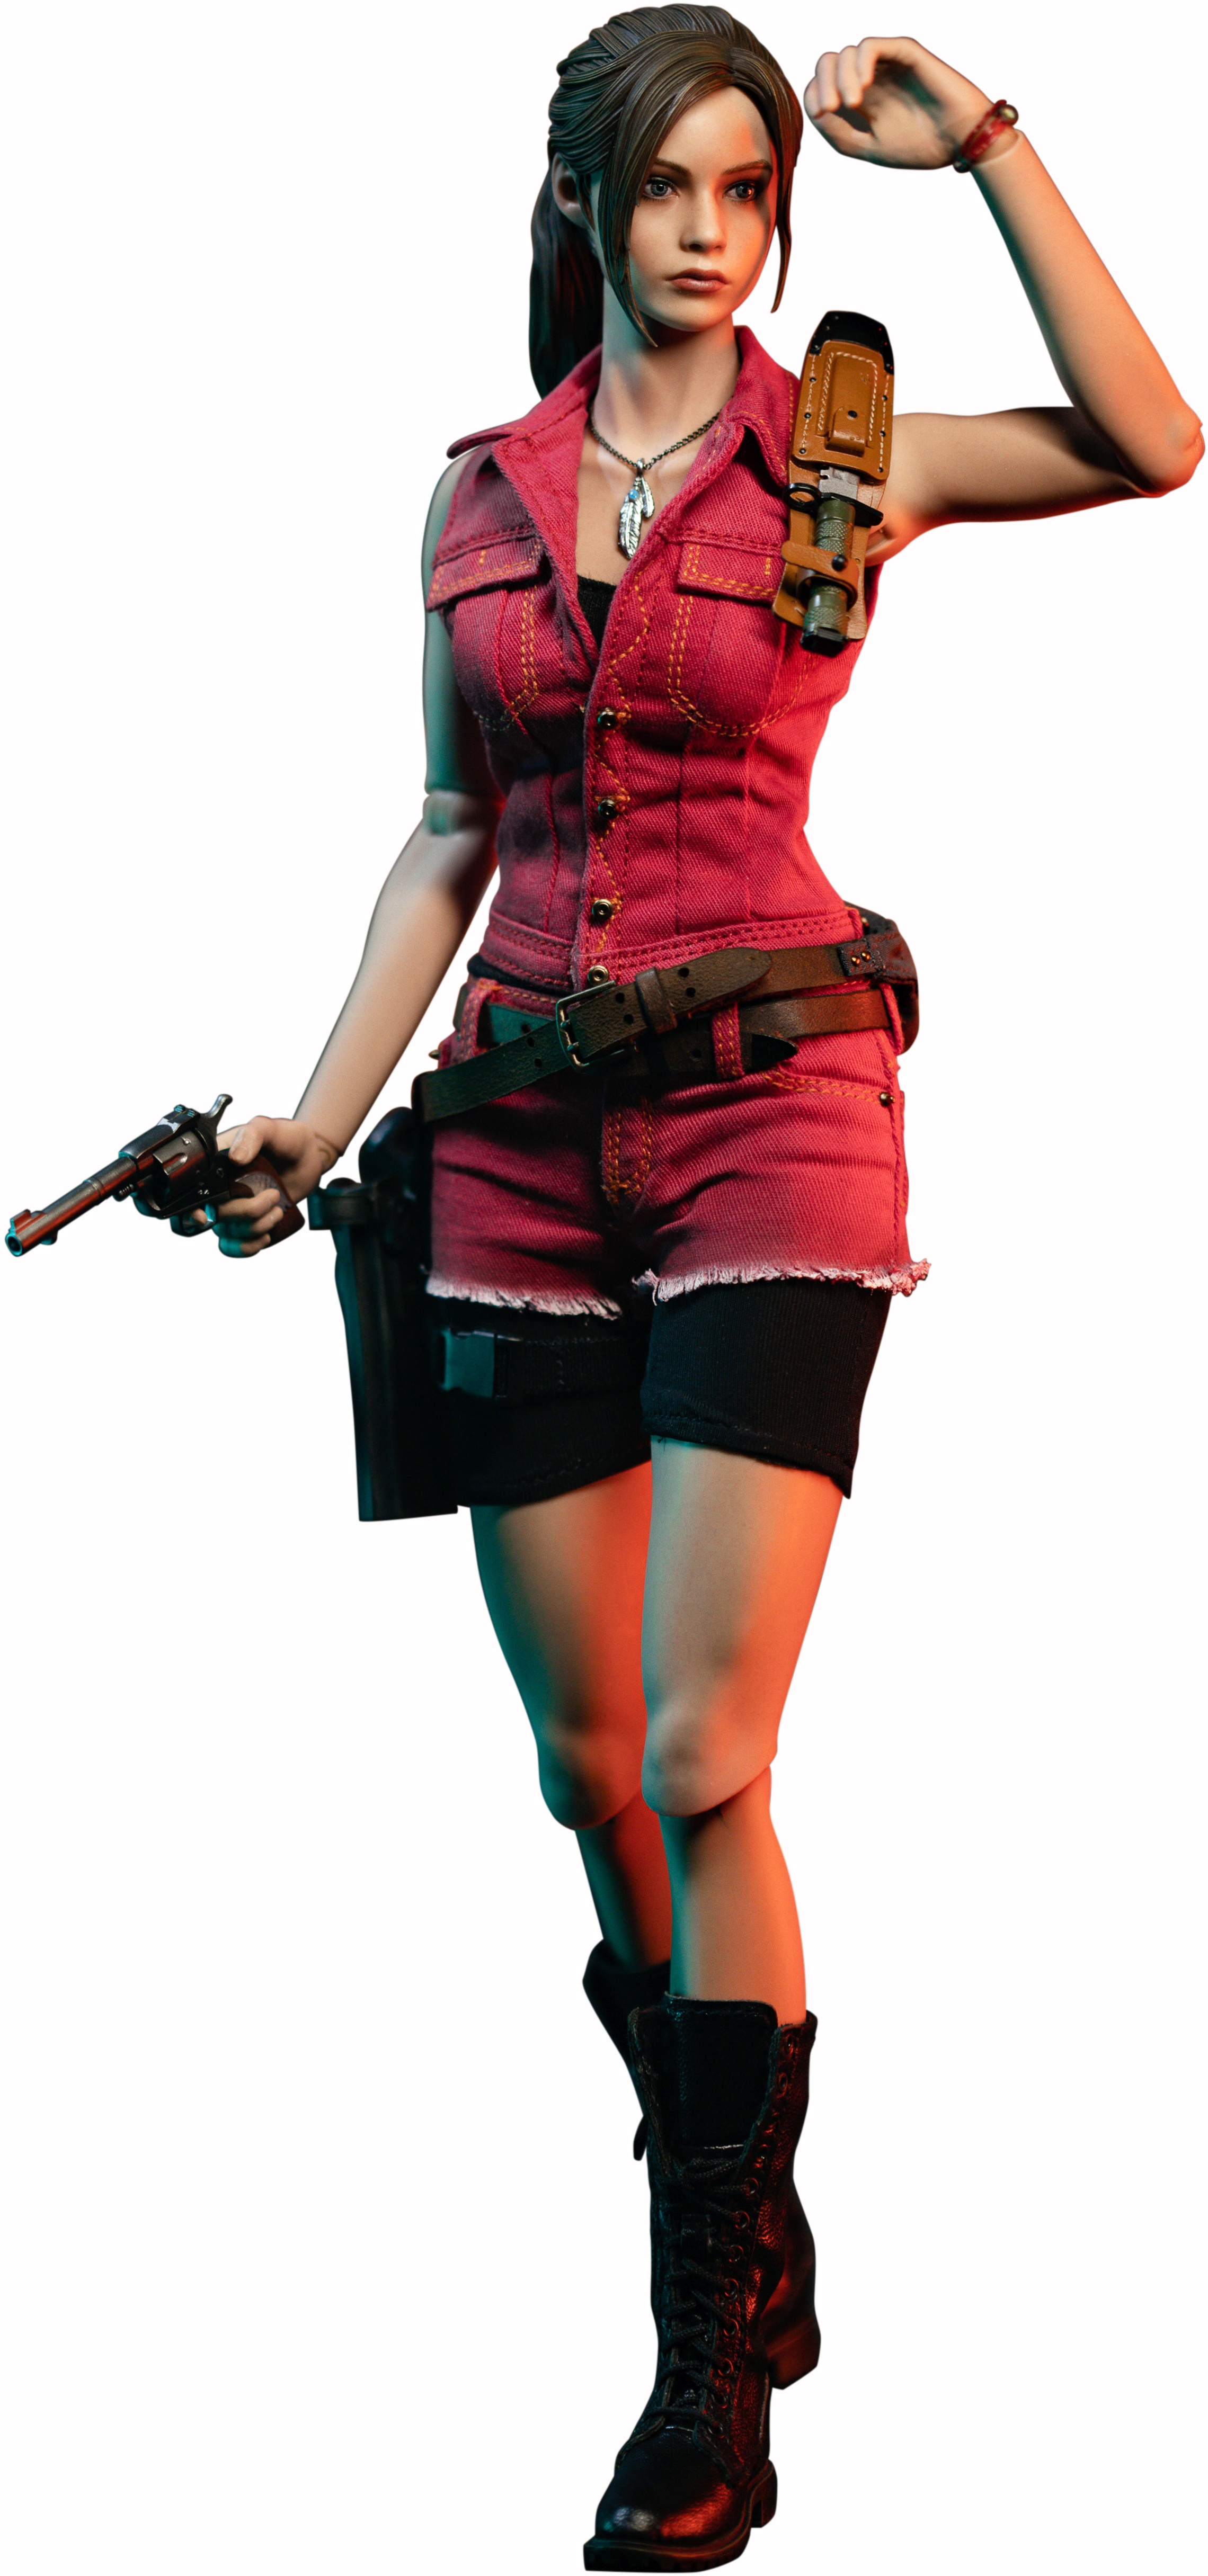 1/6 RESIDENT EVIL 2: Collectible Action Figure Claire Redfield Classic Ver.